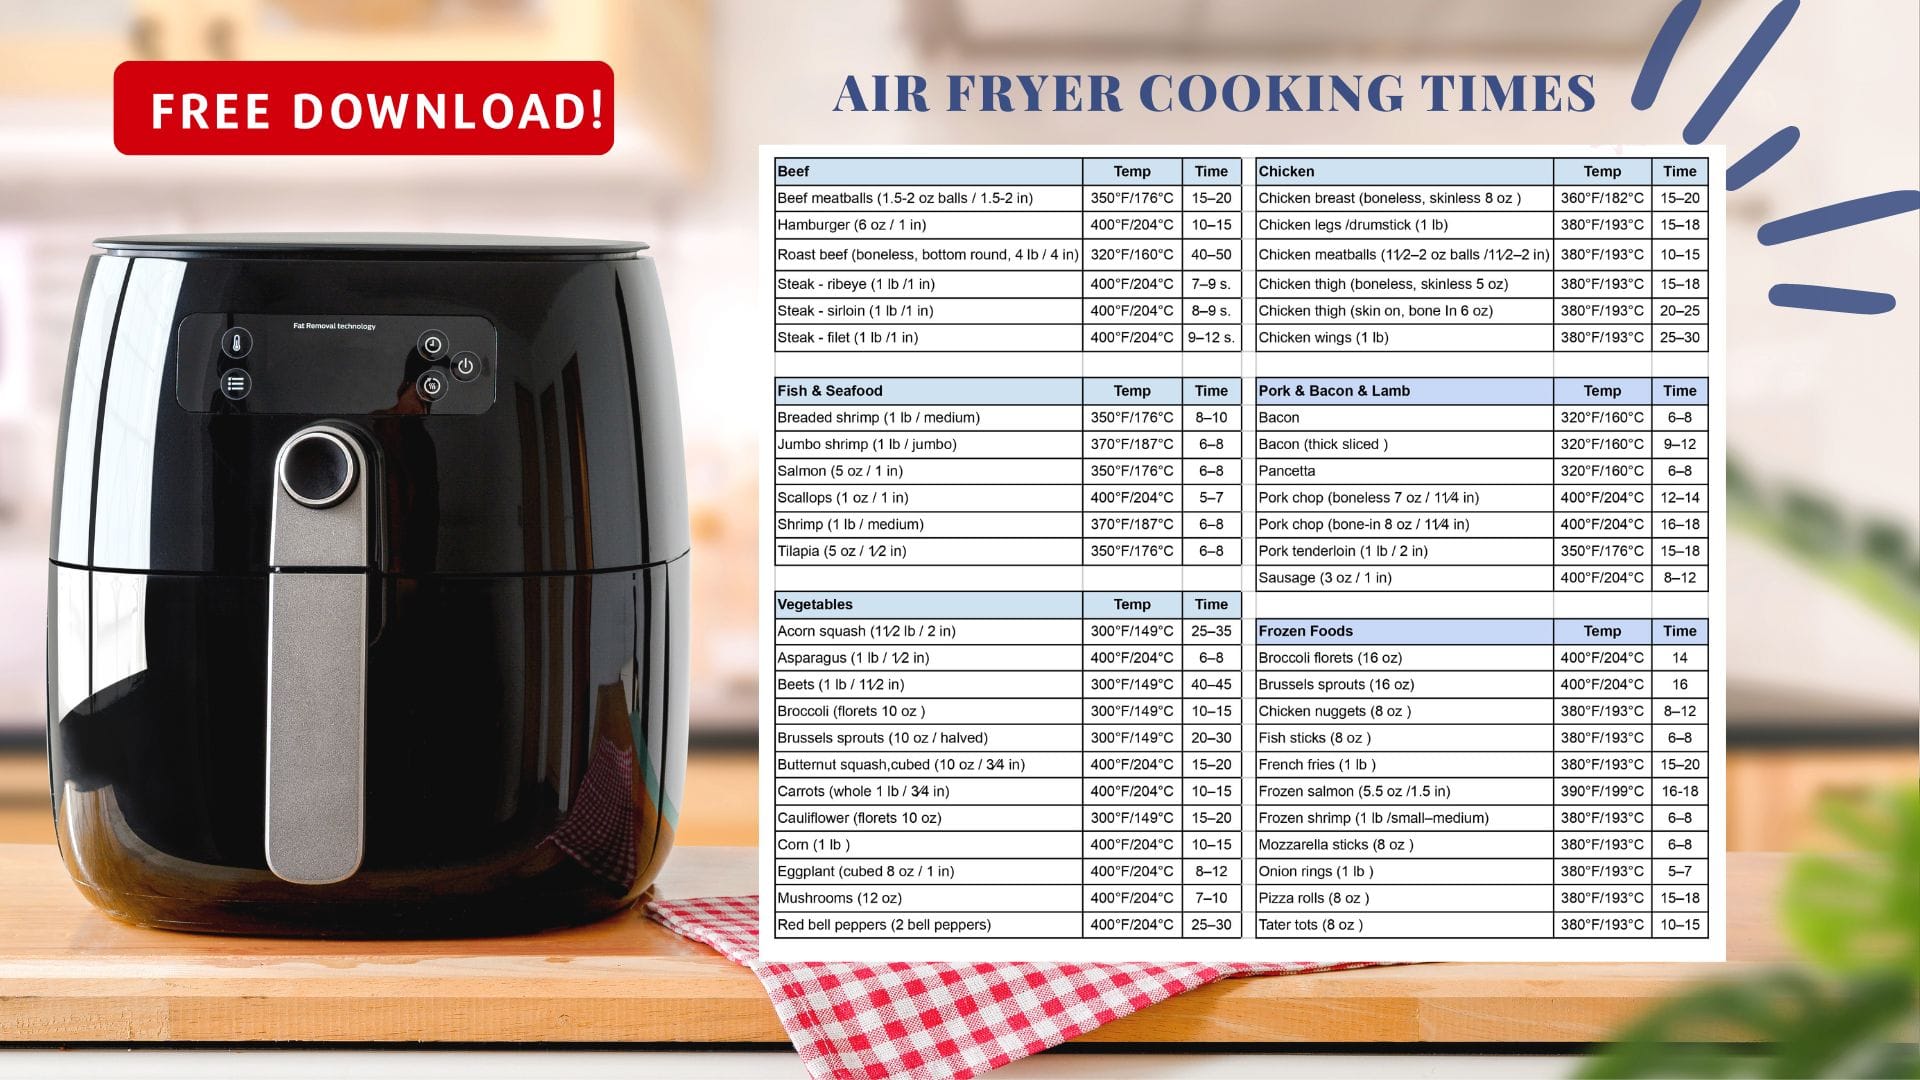 Here's Your Air Fryer Cooking Time Cheat Sheet